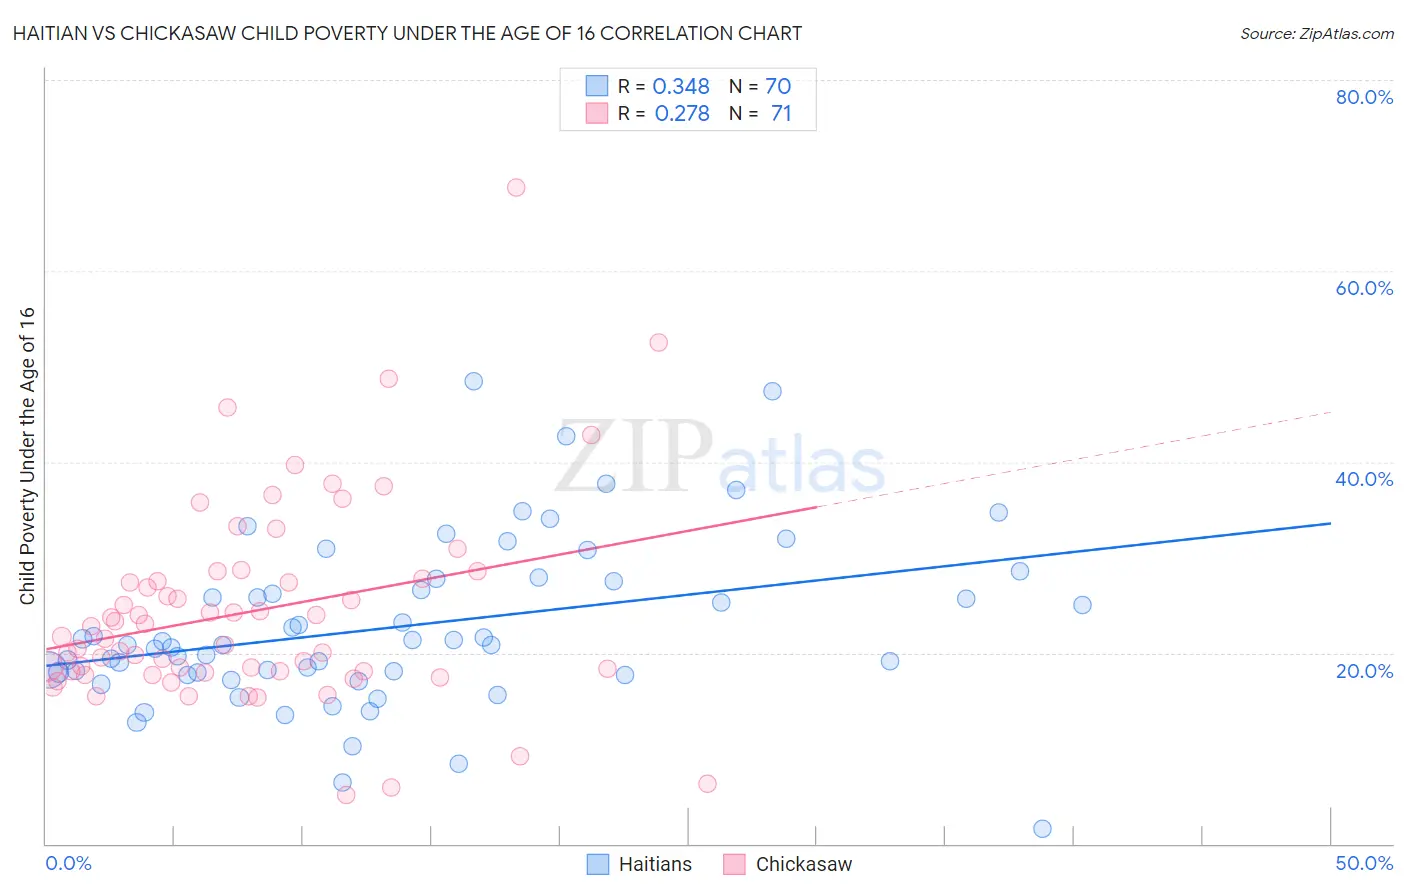 Haitian vs Chickasaw Child Poverty Under the Age of 16